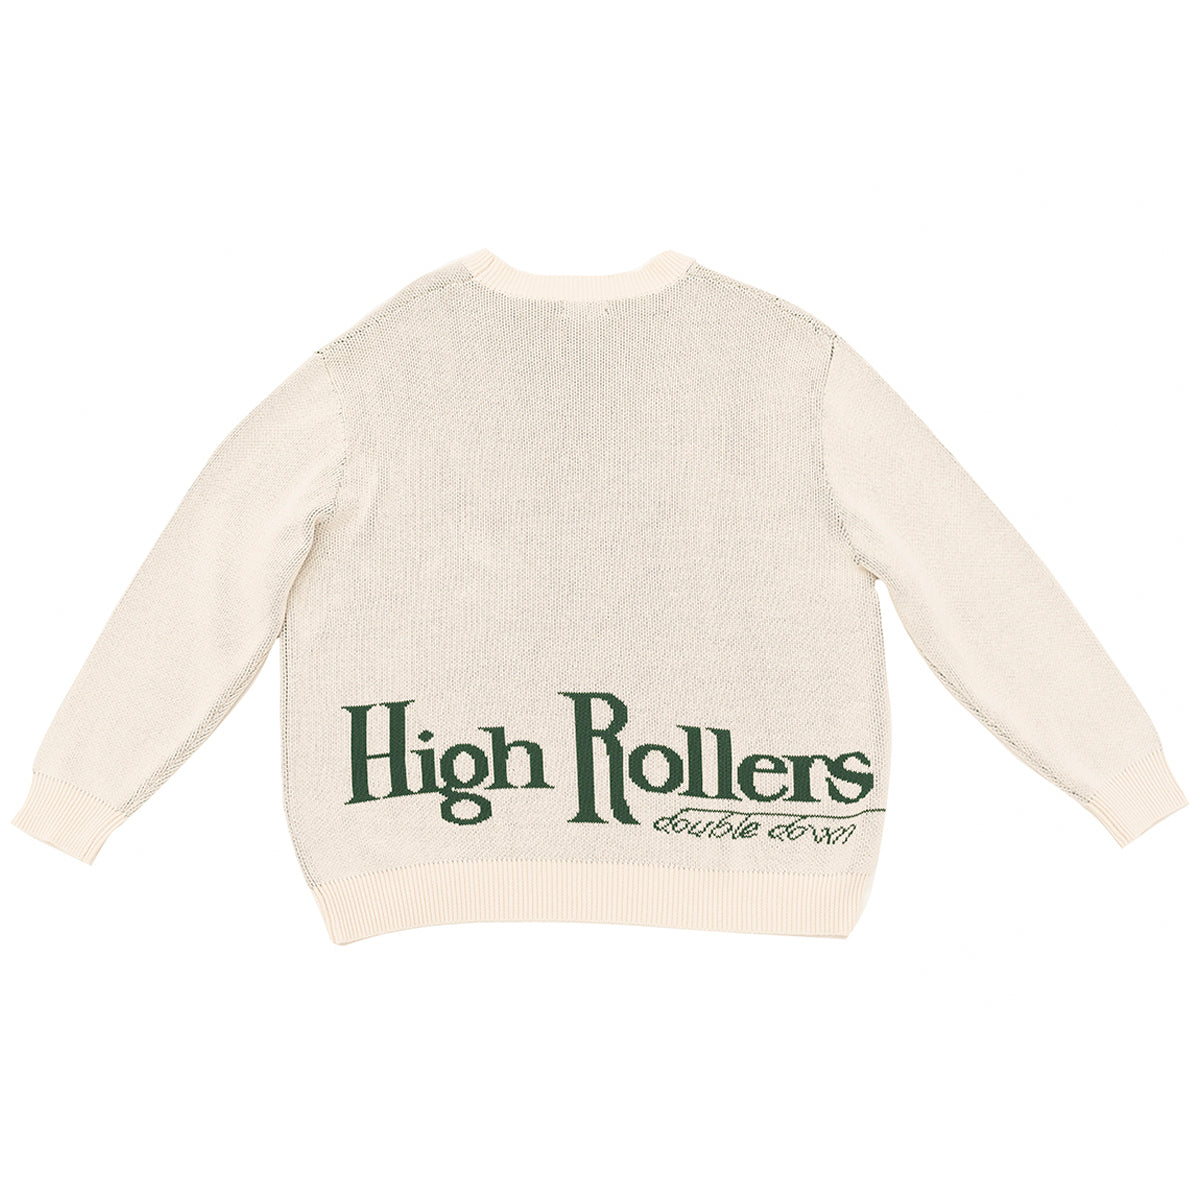 High Rollers - Old Timers Knit Sweater  - INTL Collective - High Rollers Clothing